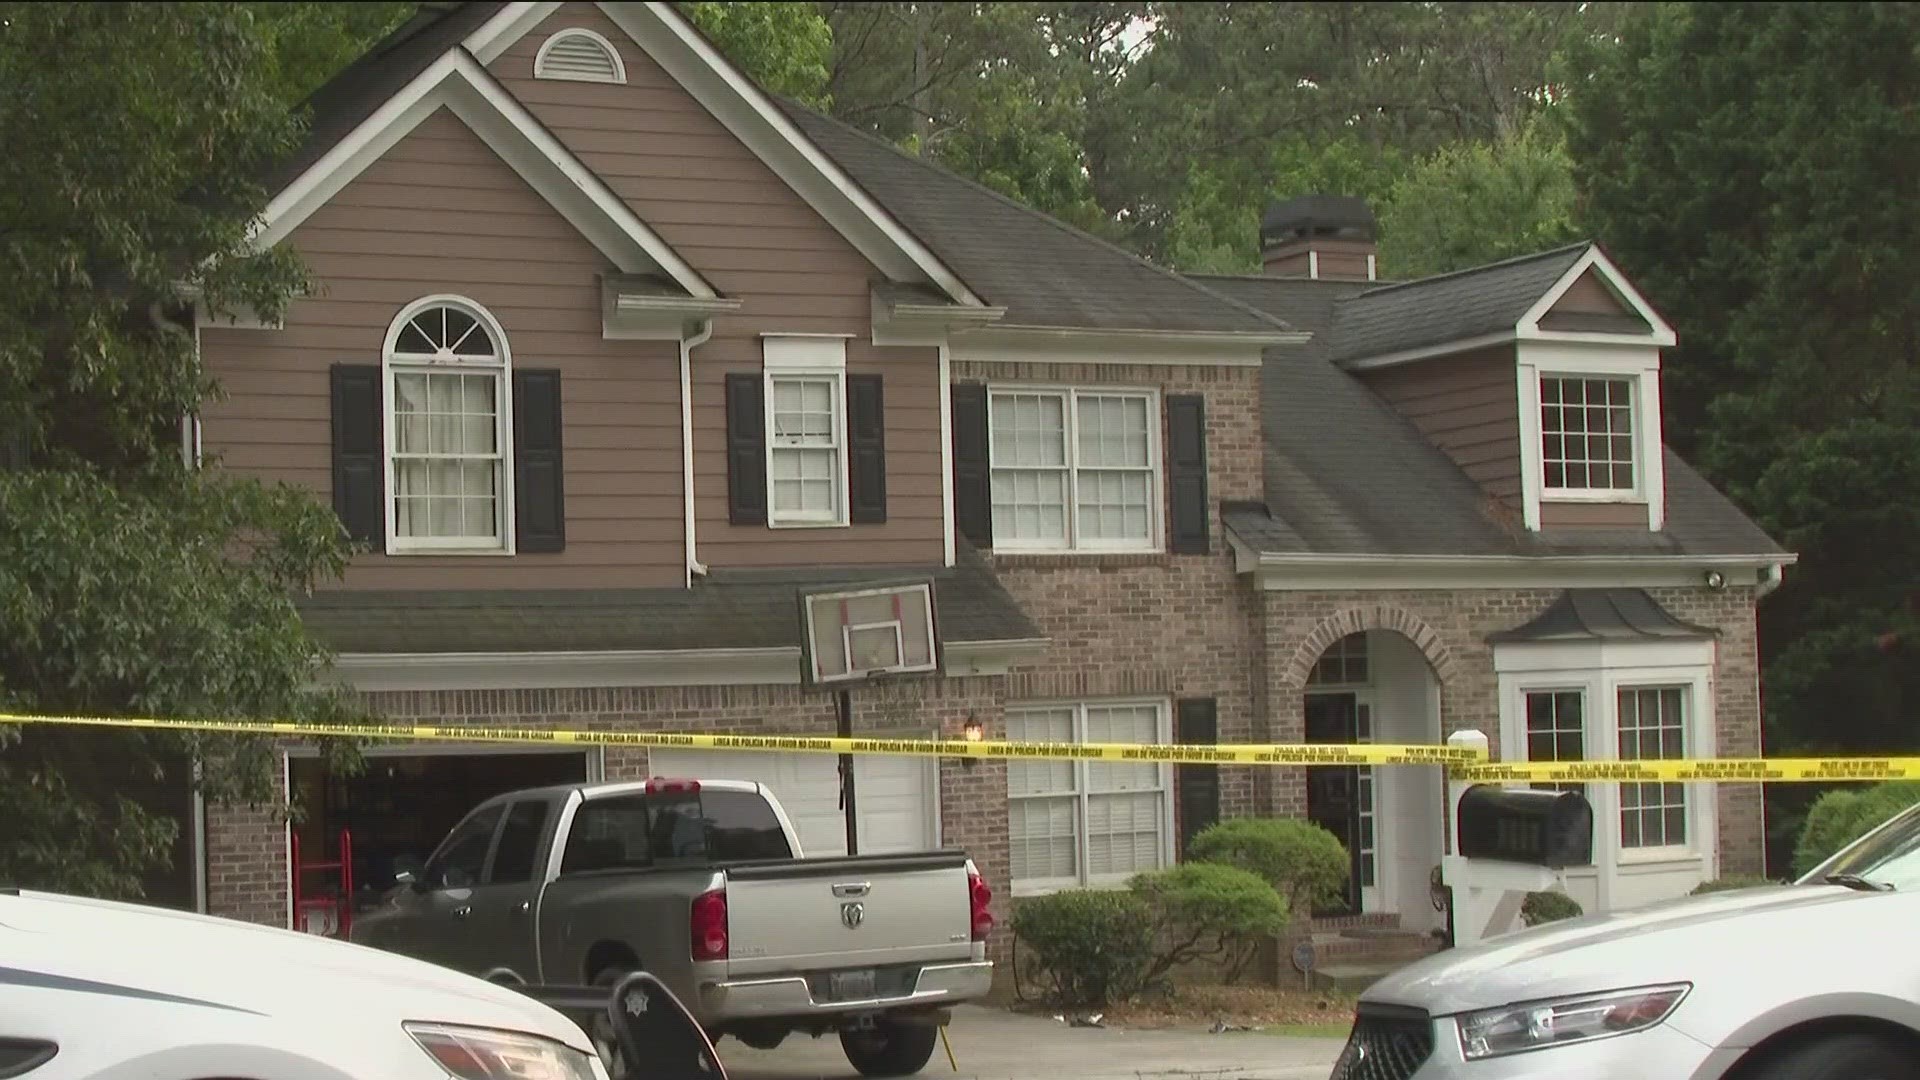 One person was shot and killed during a domestic dispute and the suspect was inside the home when police arrived.